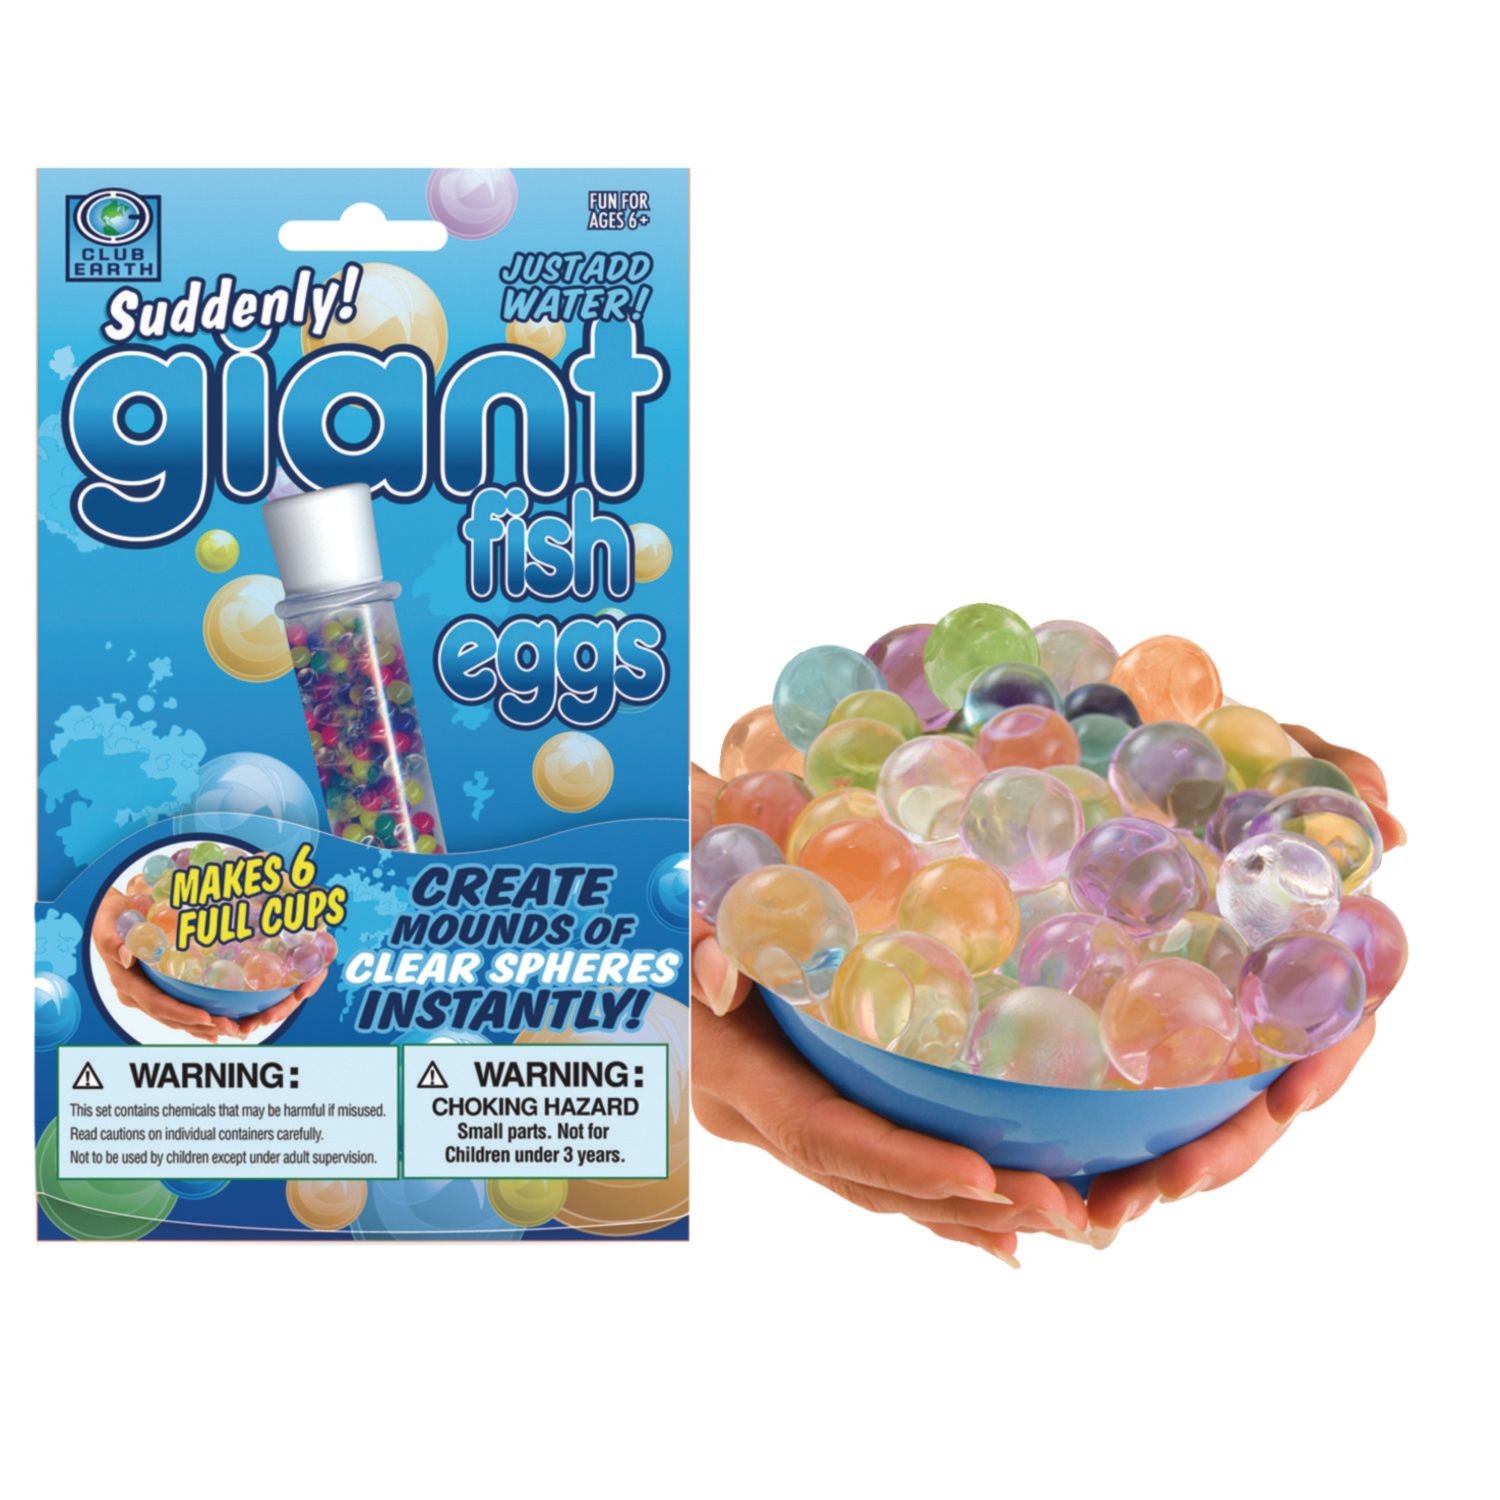 Buy Giant Fish Eggs at S&S Worldwide